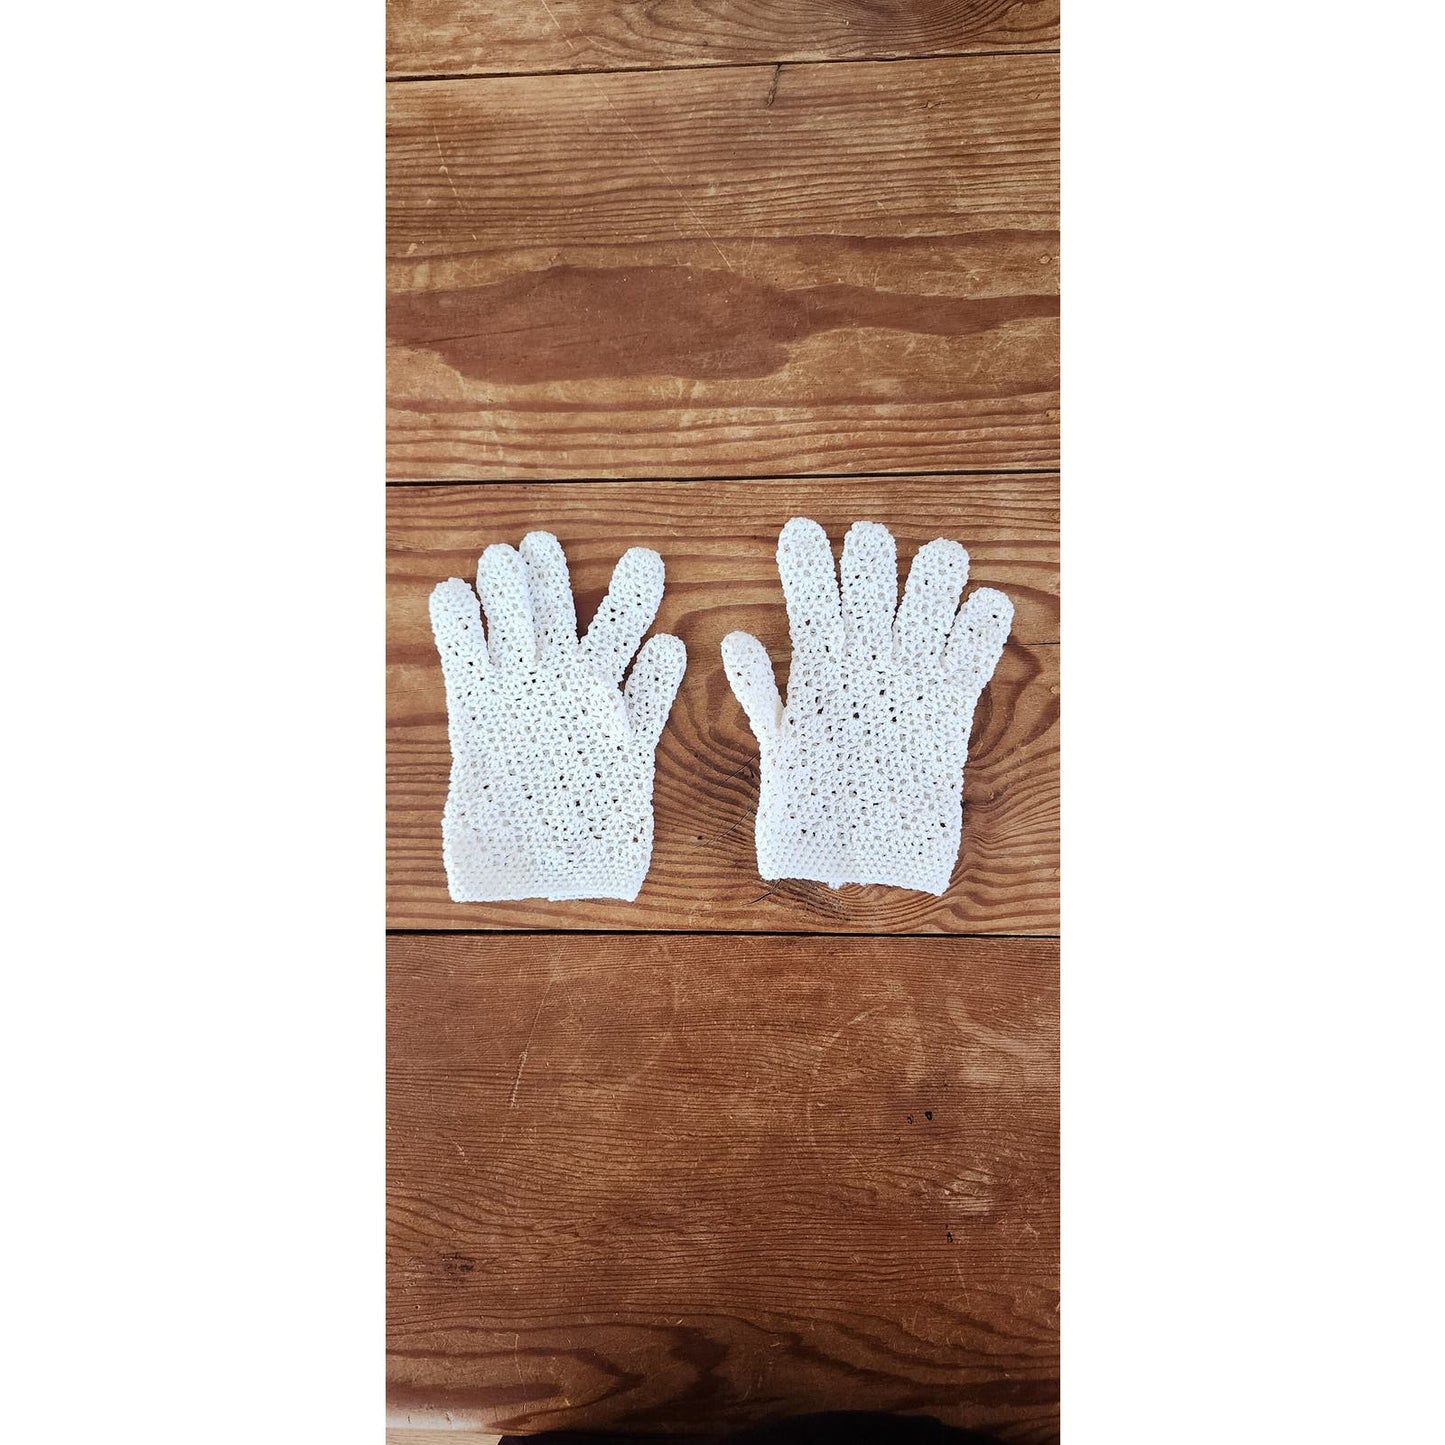 Vintage Ladies Gloves in Ivory Crochet Lace Stretchy